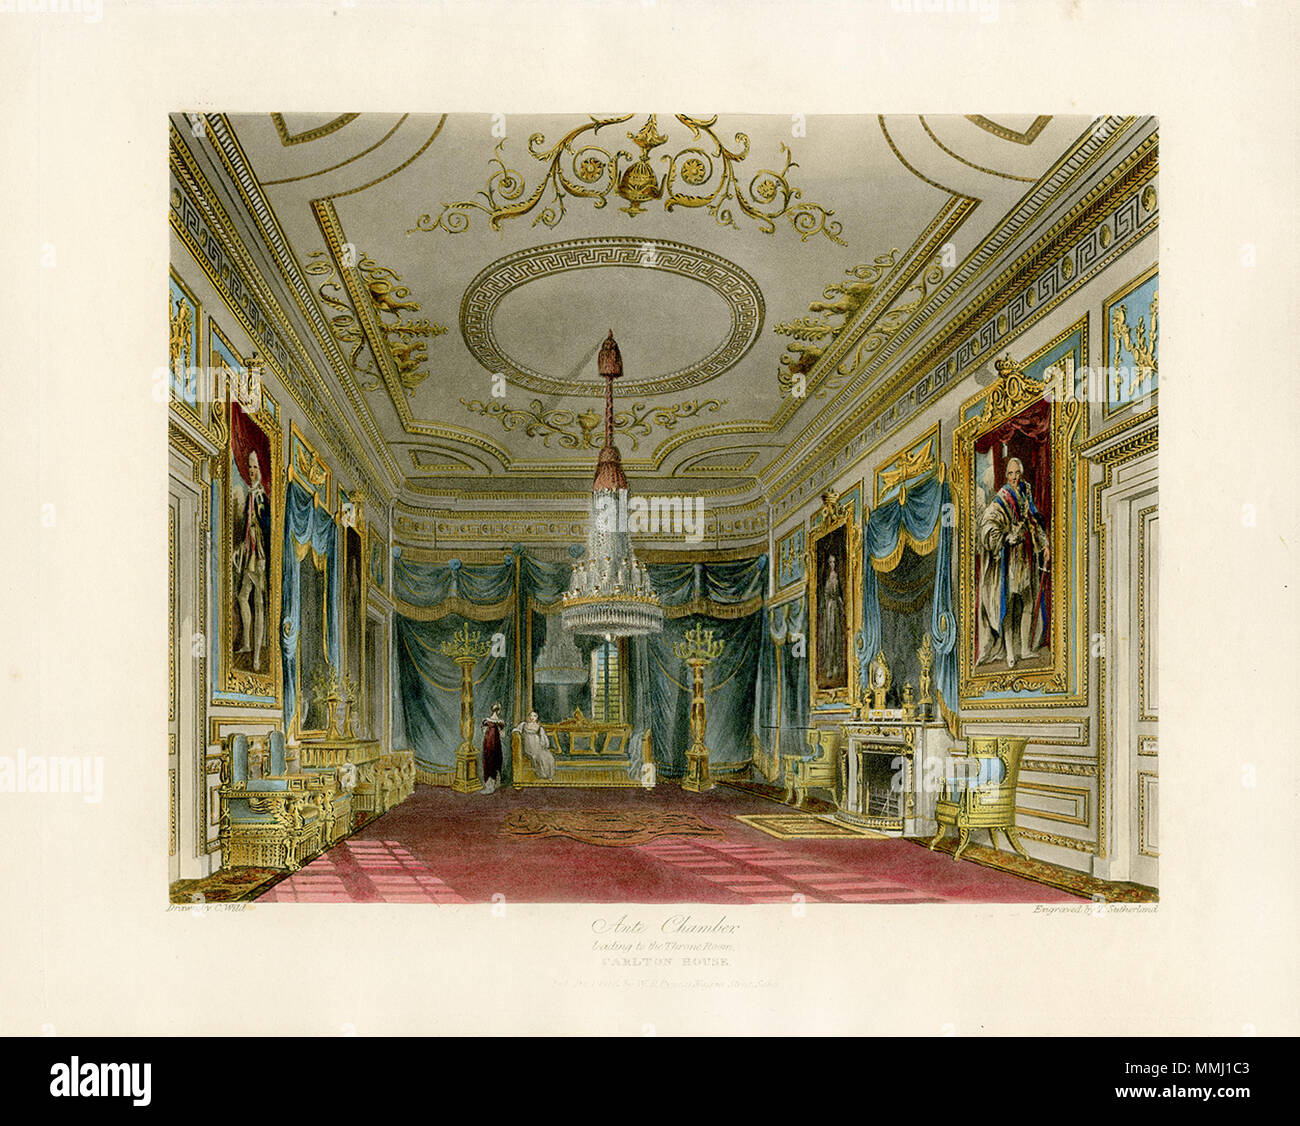 Ante Chamber leading to the Throne Room, Carlton House. 1 December 1816. Ante Chamber, Carlton House, from Pyne's Royal Residences, 1819 - panteek pyn32-431 Stock Photo